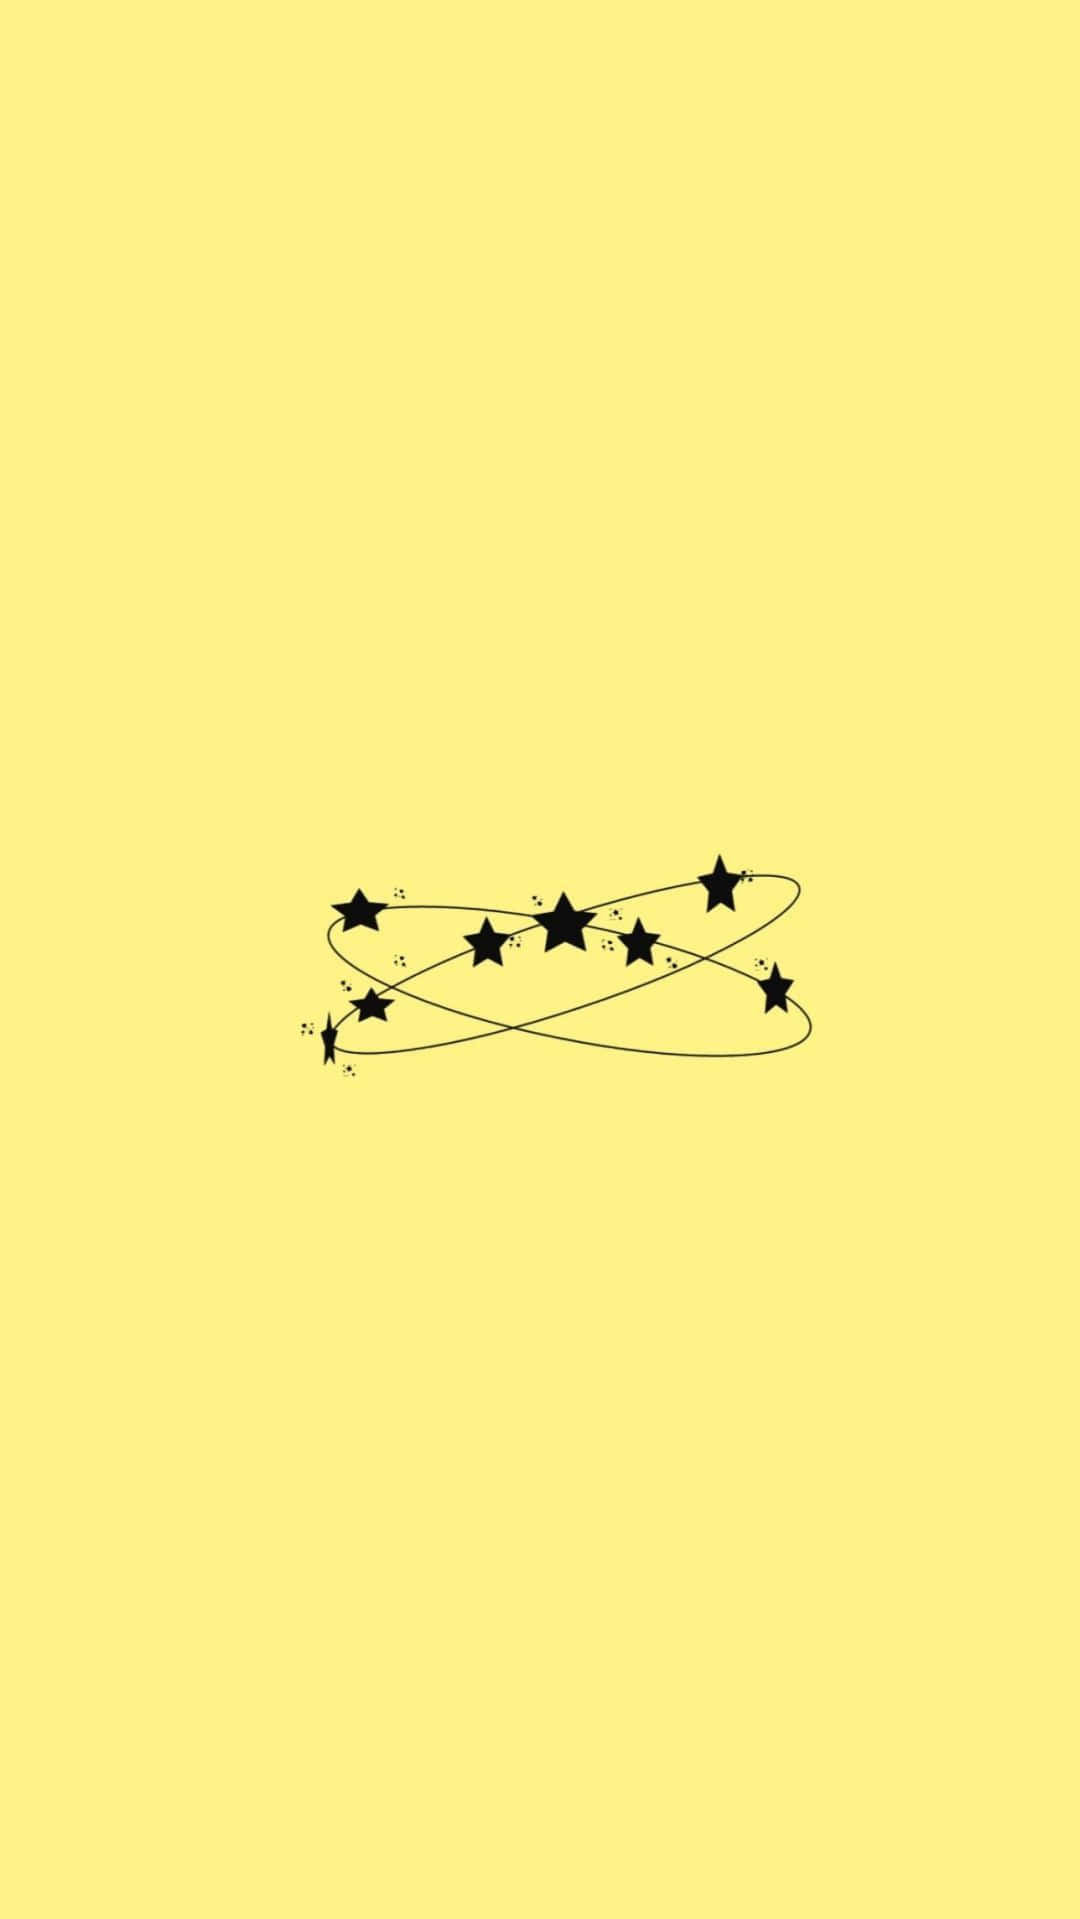 Aesthetic phone wallpaper with stars on a yellow background - Yellow iphone